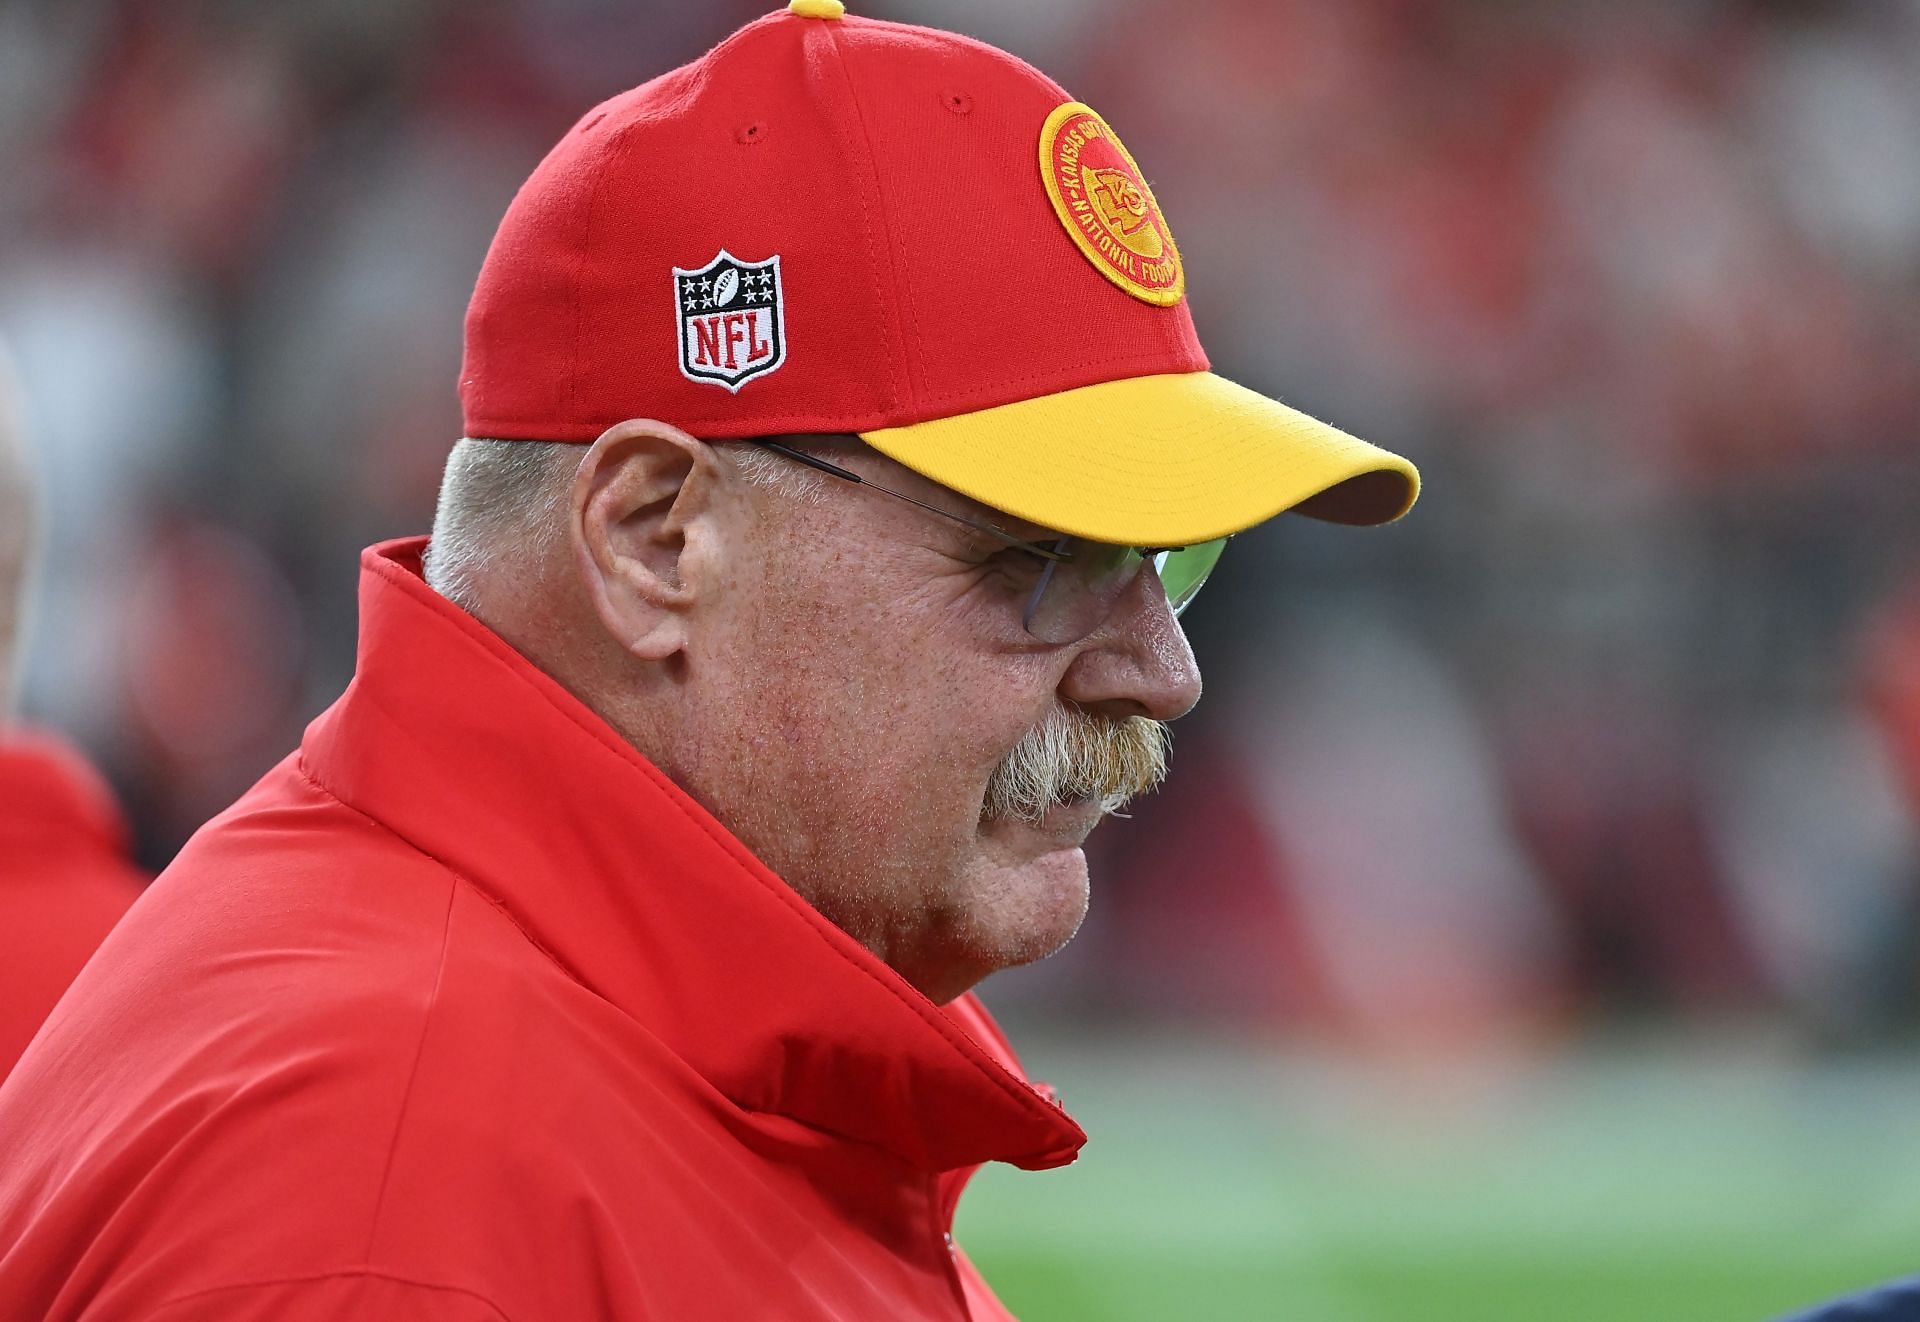 How Long Has Andy Reid Been Coaching The Chiefs?